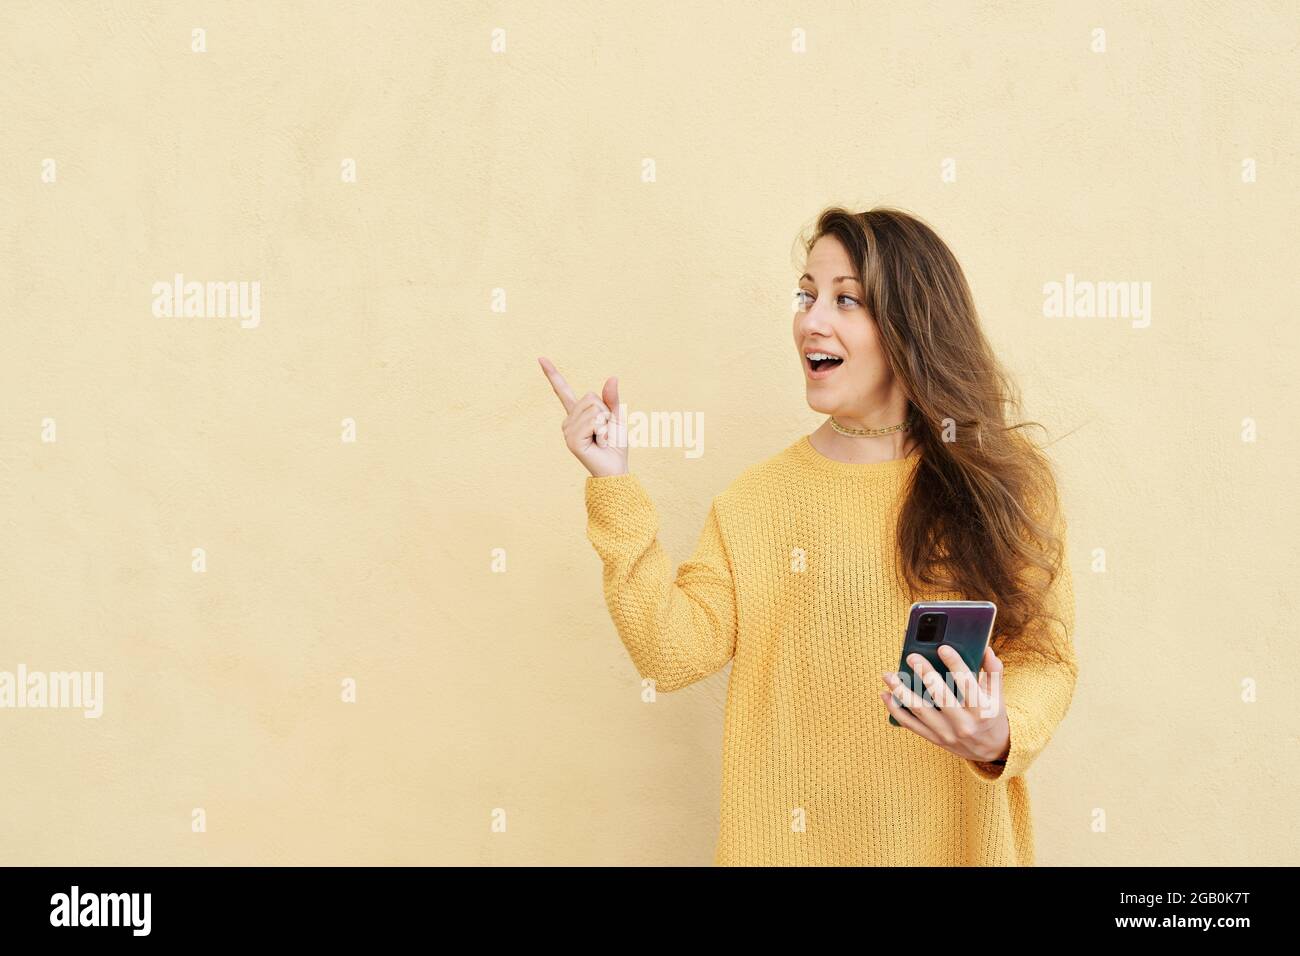 woman with a startled gesture and a smart phone pointing to copy space on a yellow background Stock Photo